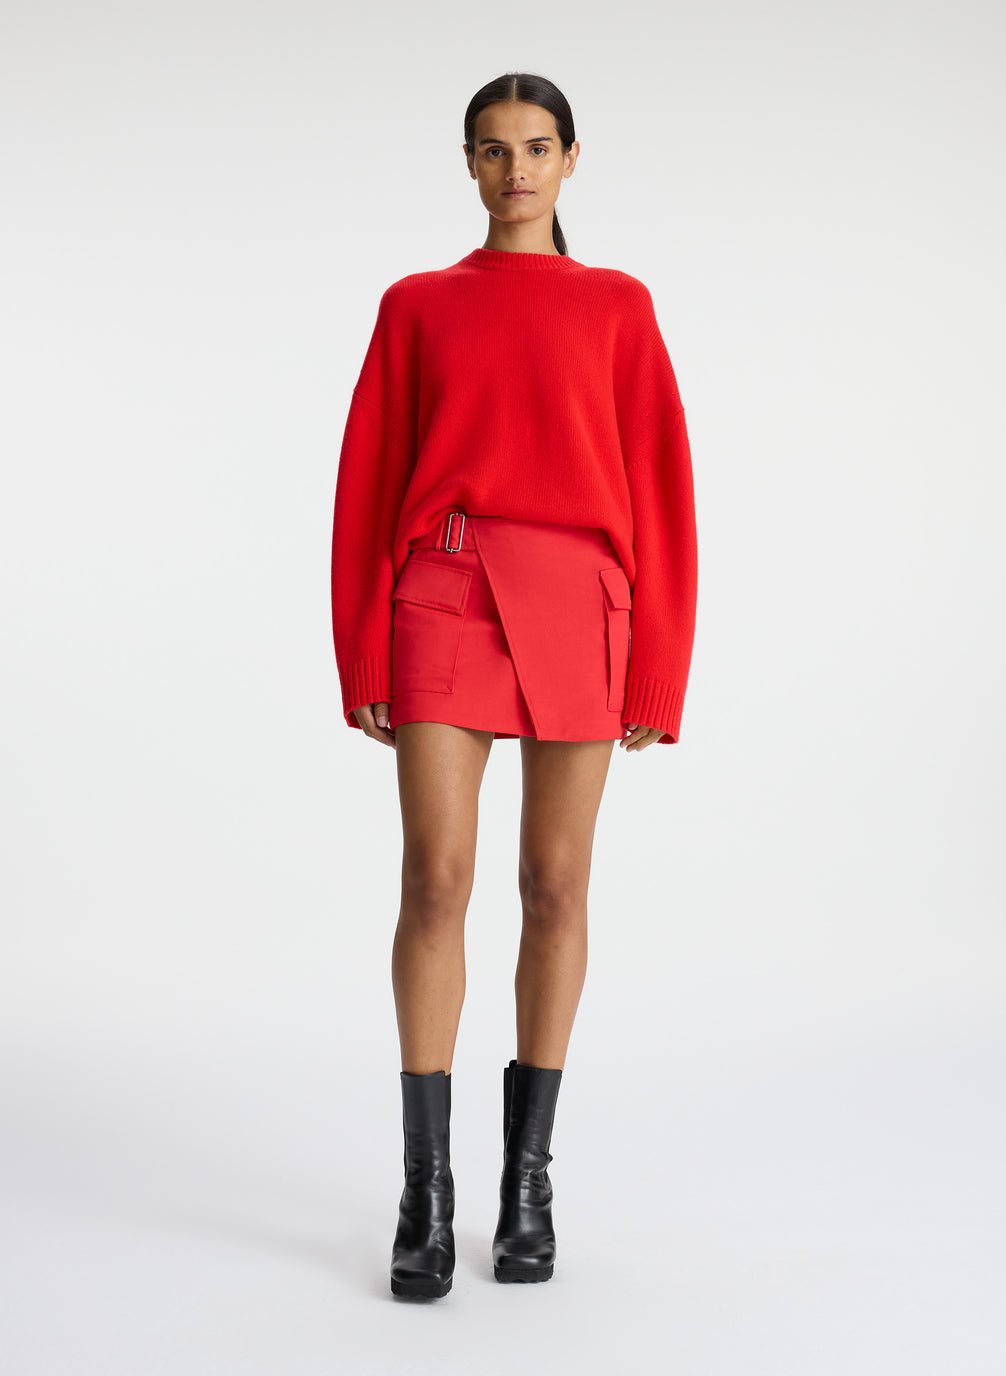 front view of woman wearing red cashmere long sleeve sweater